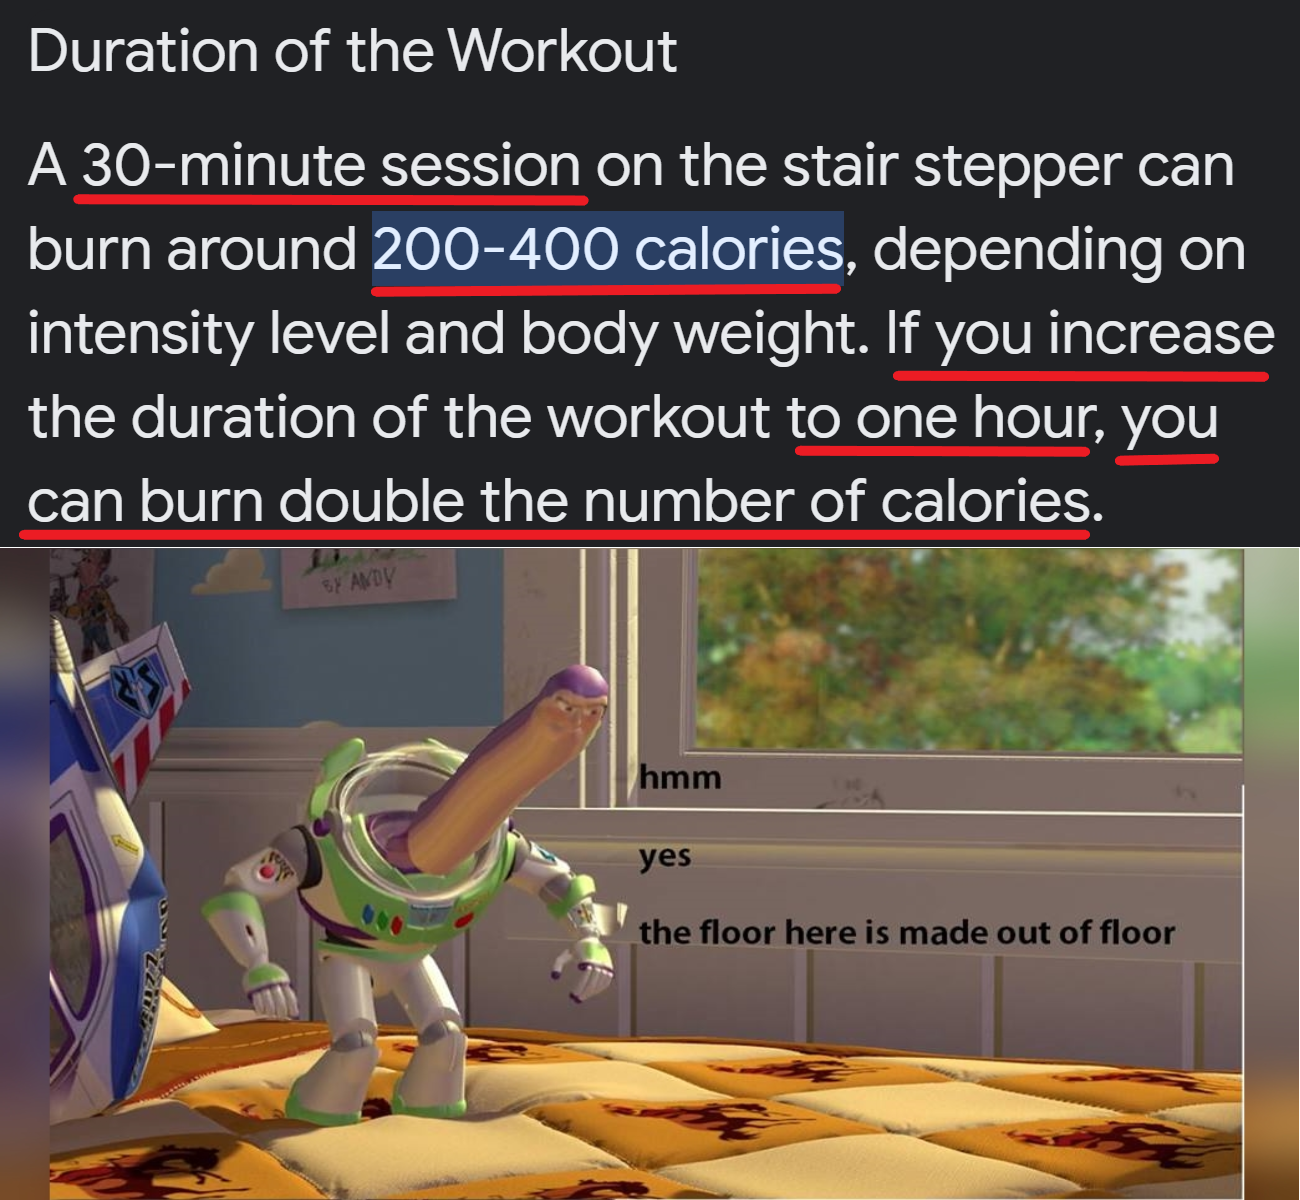 dank memes - hmm yes the floor is made of floor - Duration of the Workout A 30minute session on the stair stepper can burn around 200400 calories, depending on intensity level and body weight. If you increase the duration of the workout to one hour, you c